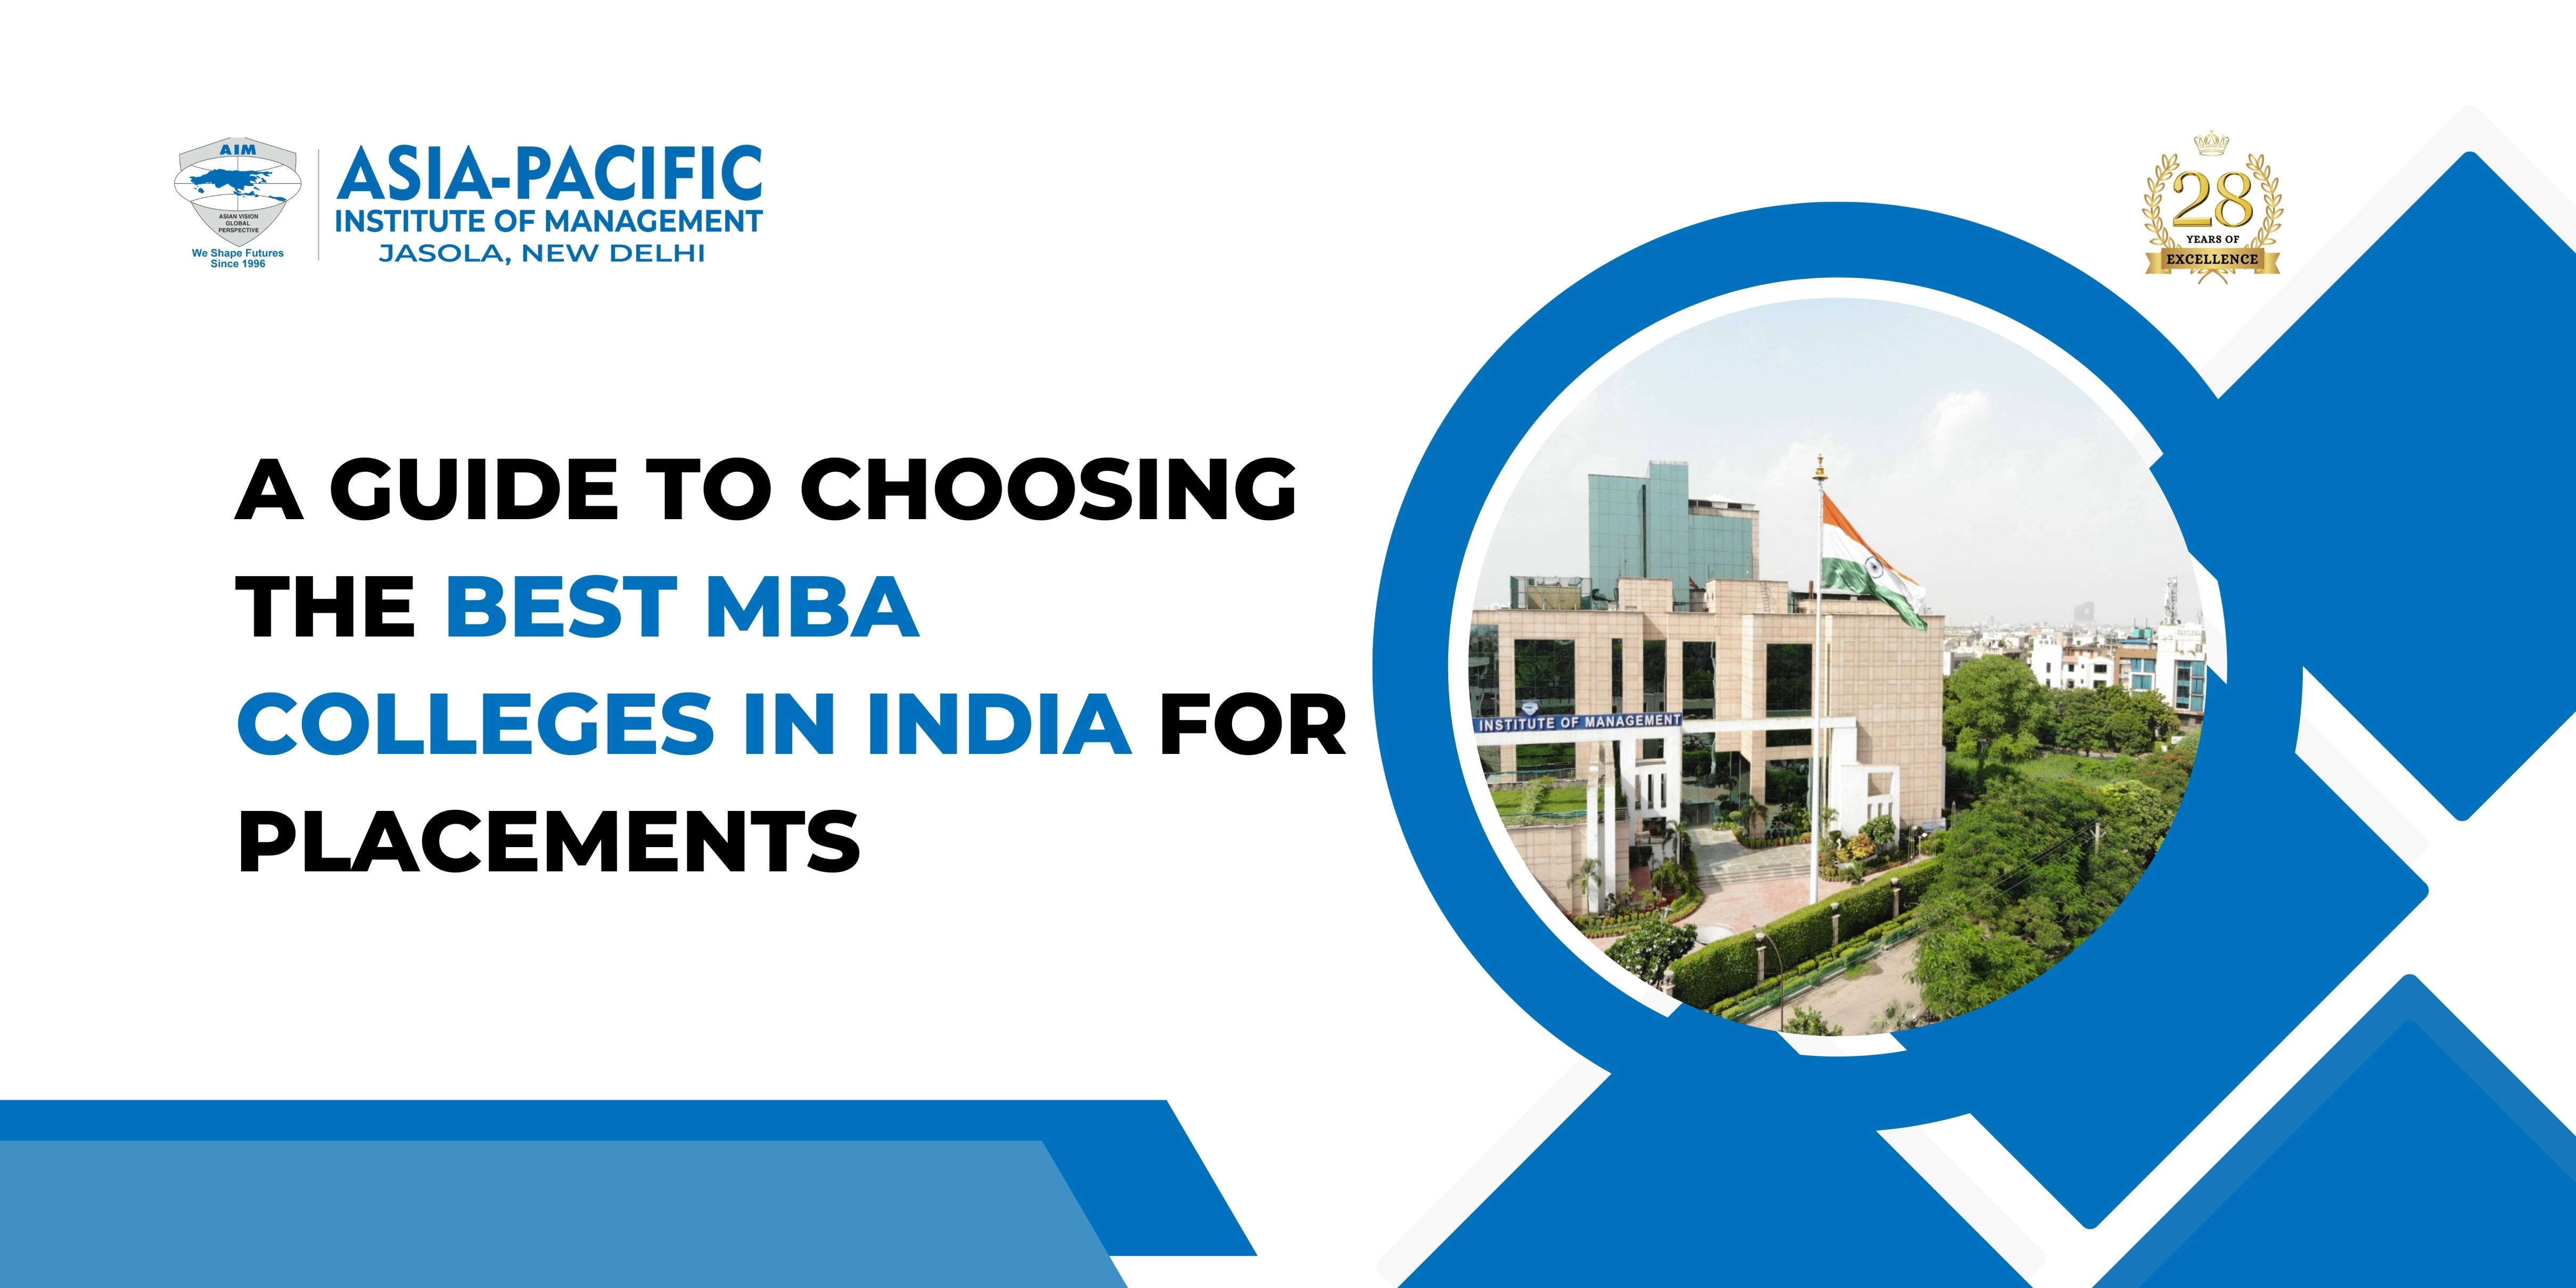 A Guide to Choosing the Best MBA Colleges in India for Placements